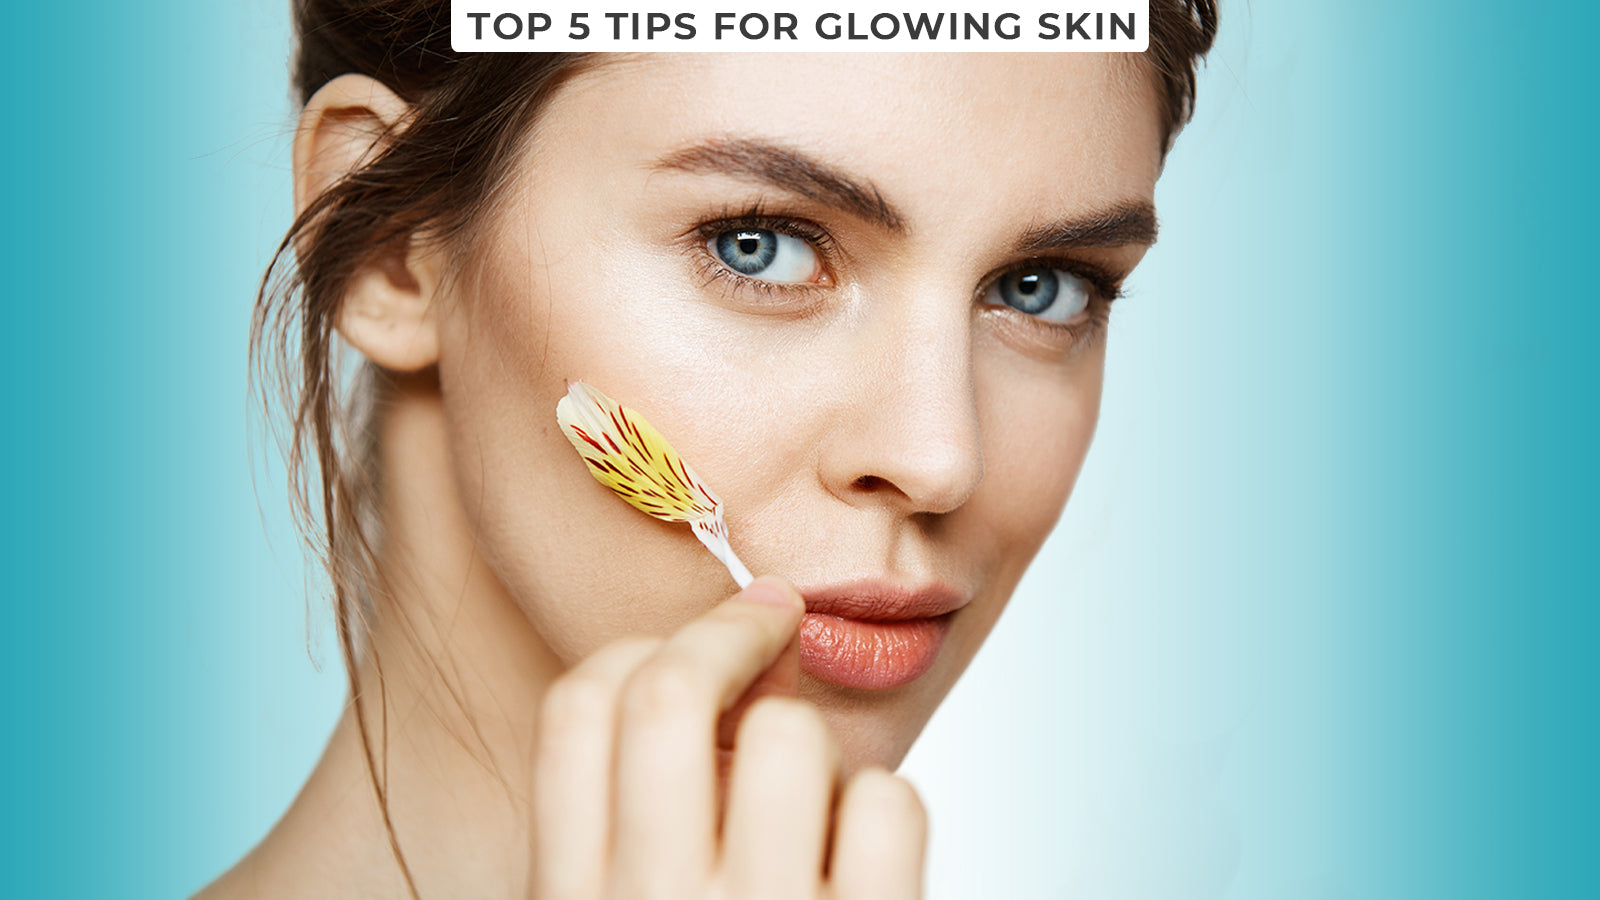 Top 5 Tips for Glowing Skin